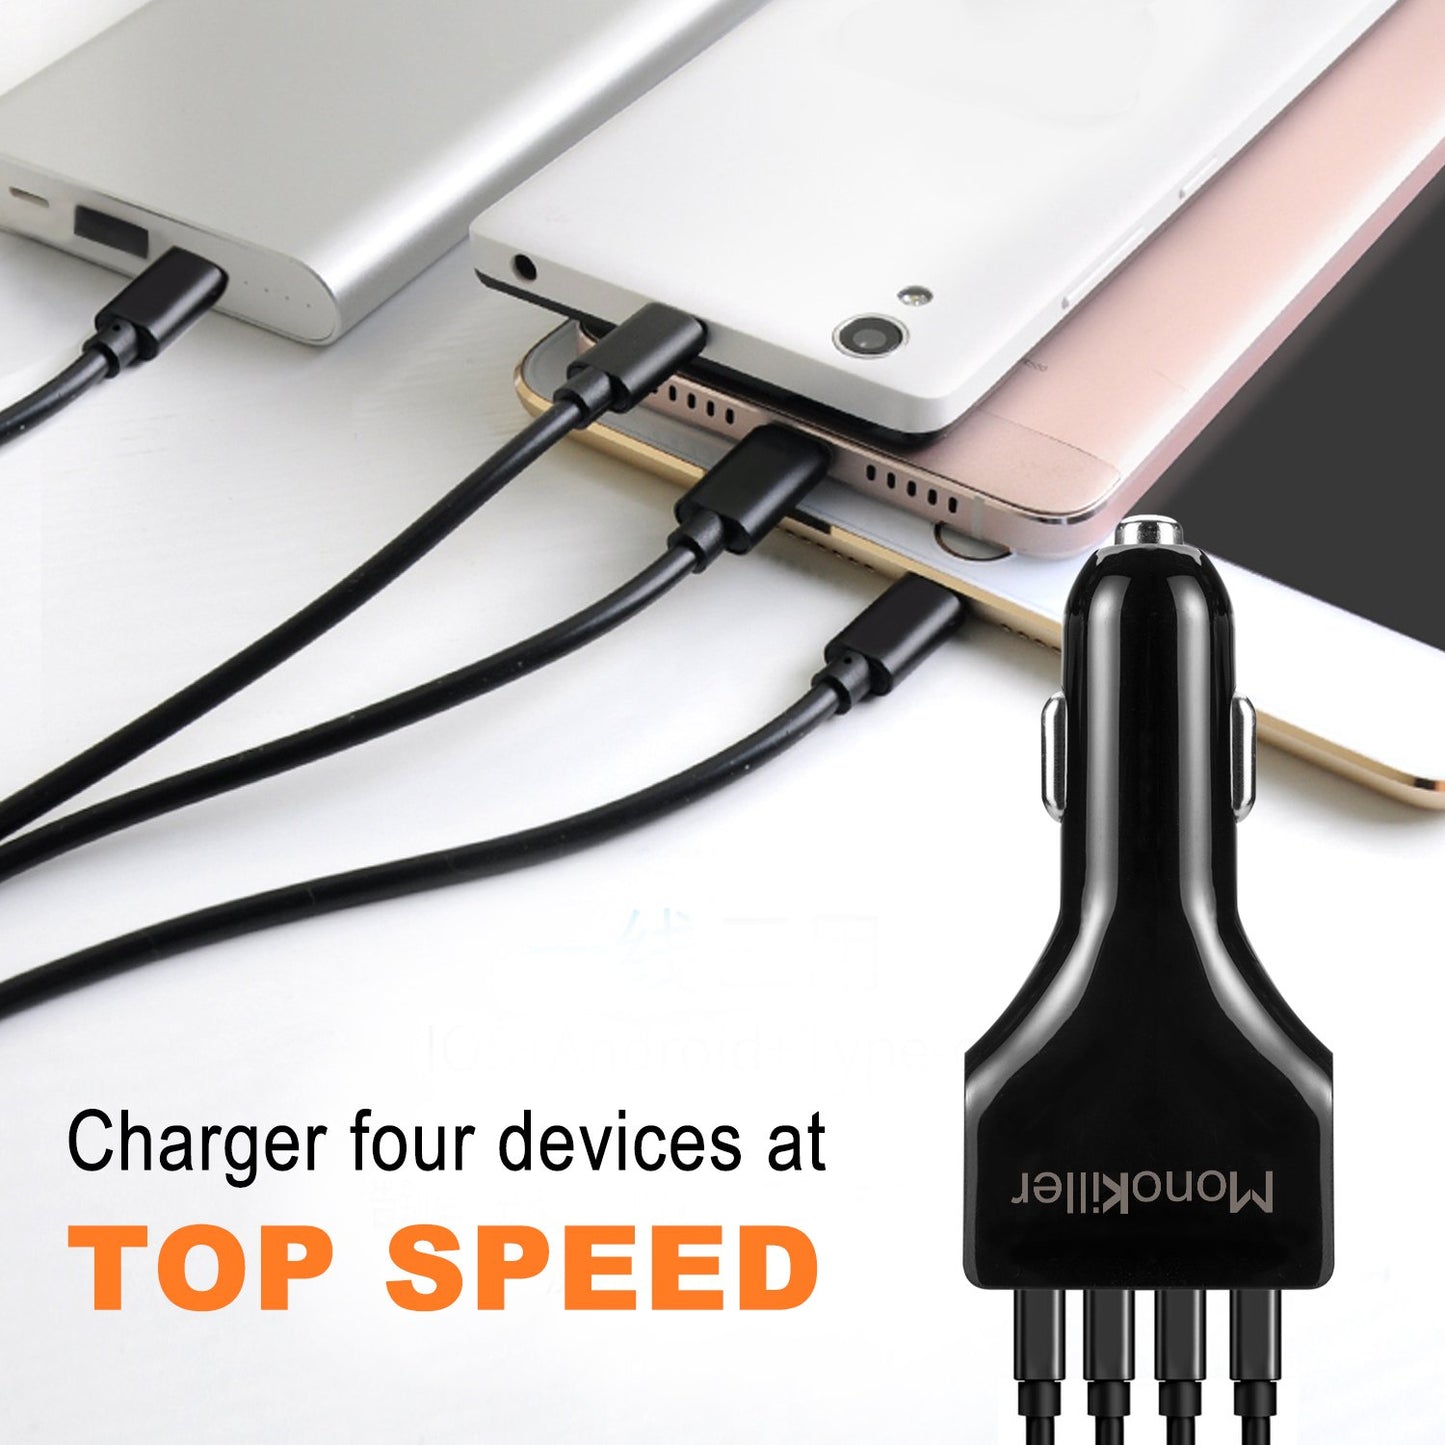 EYUVAA 4 Ports Car Charger 36W Quick Charge 3.0 USB Fast Adapter QC 3.0 (Black)